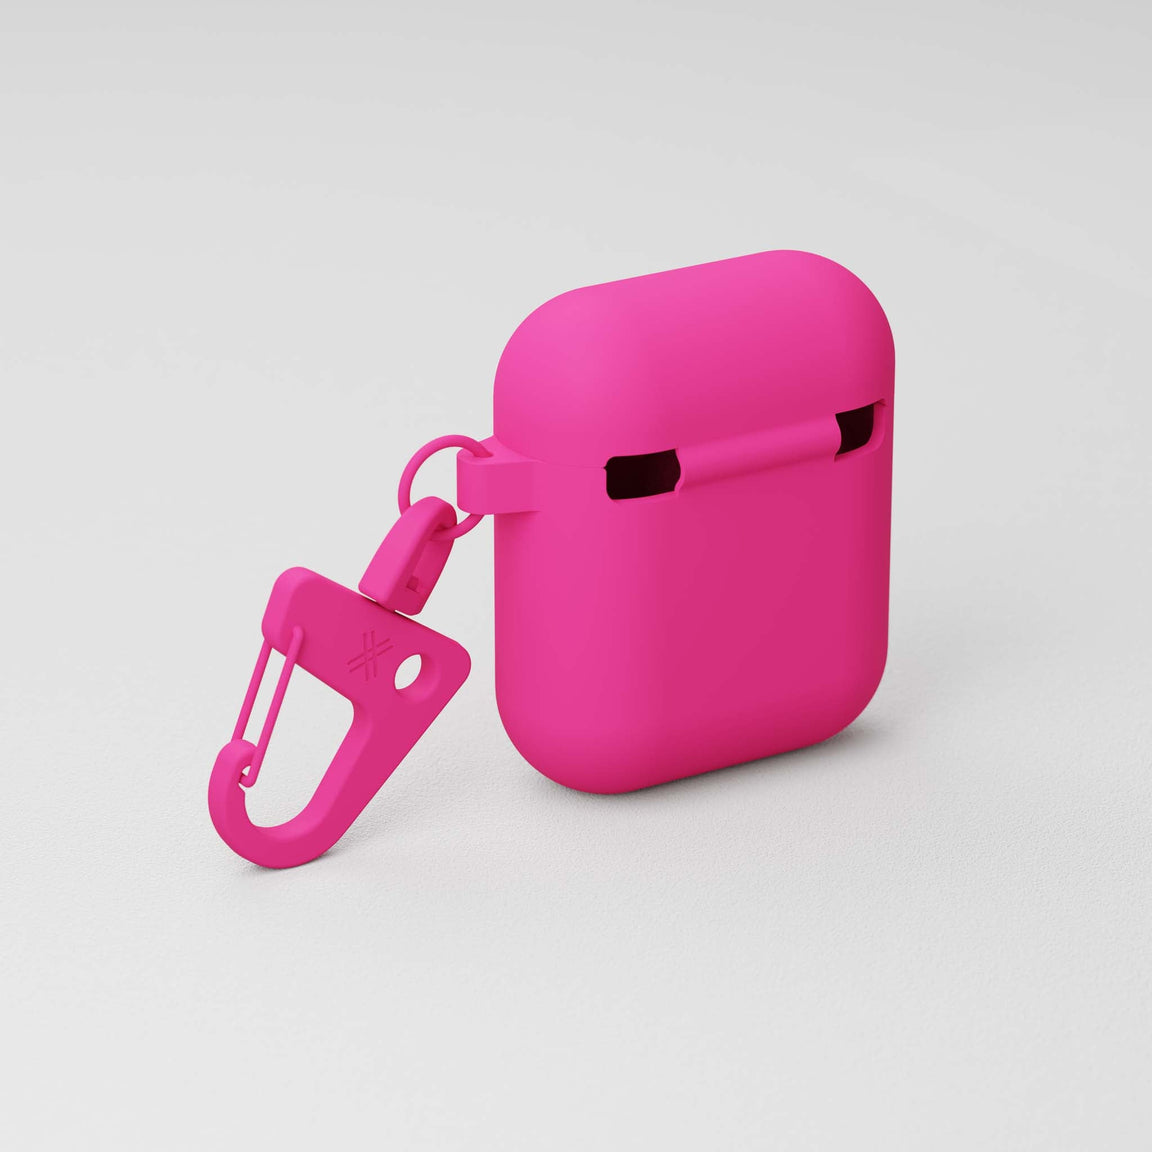 AirtPods case in Bright Pink with carabiner hook and soft-touch | XOUXOU